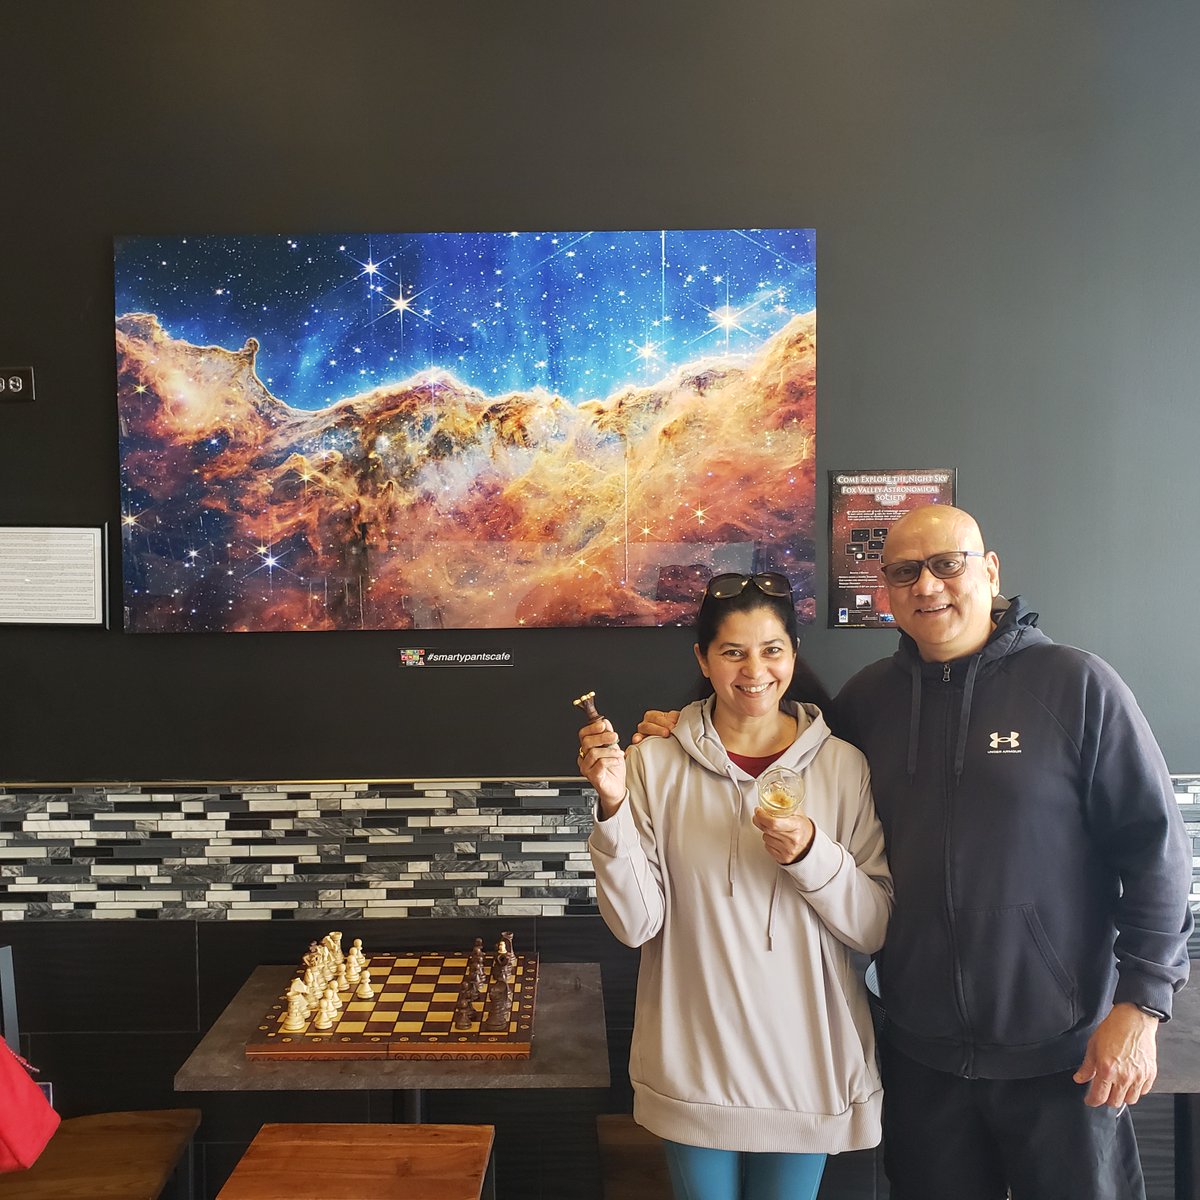 This awesome couple traveled all the way from Naperville to experience Smarty Pants Cafe after reading a feature story in @NapervilleMag  on our concept! Way cool!
817 N Randall Batavia, IL
#batavi #genevail #stcharlesil #aurorail #science #CoffeeTime  #tea
#Naperville